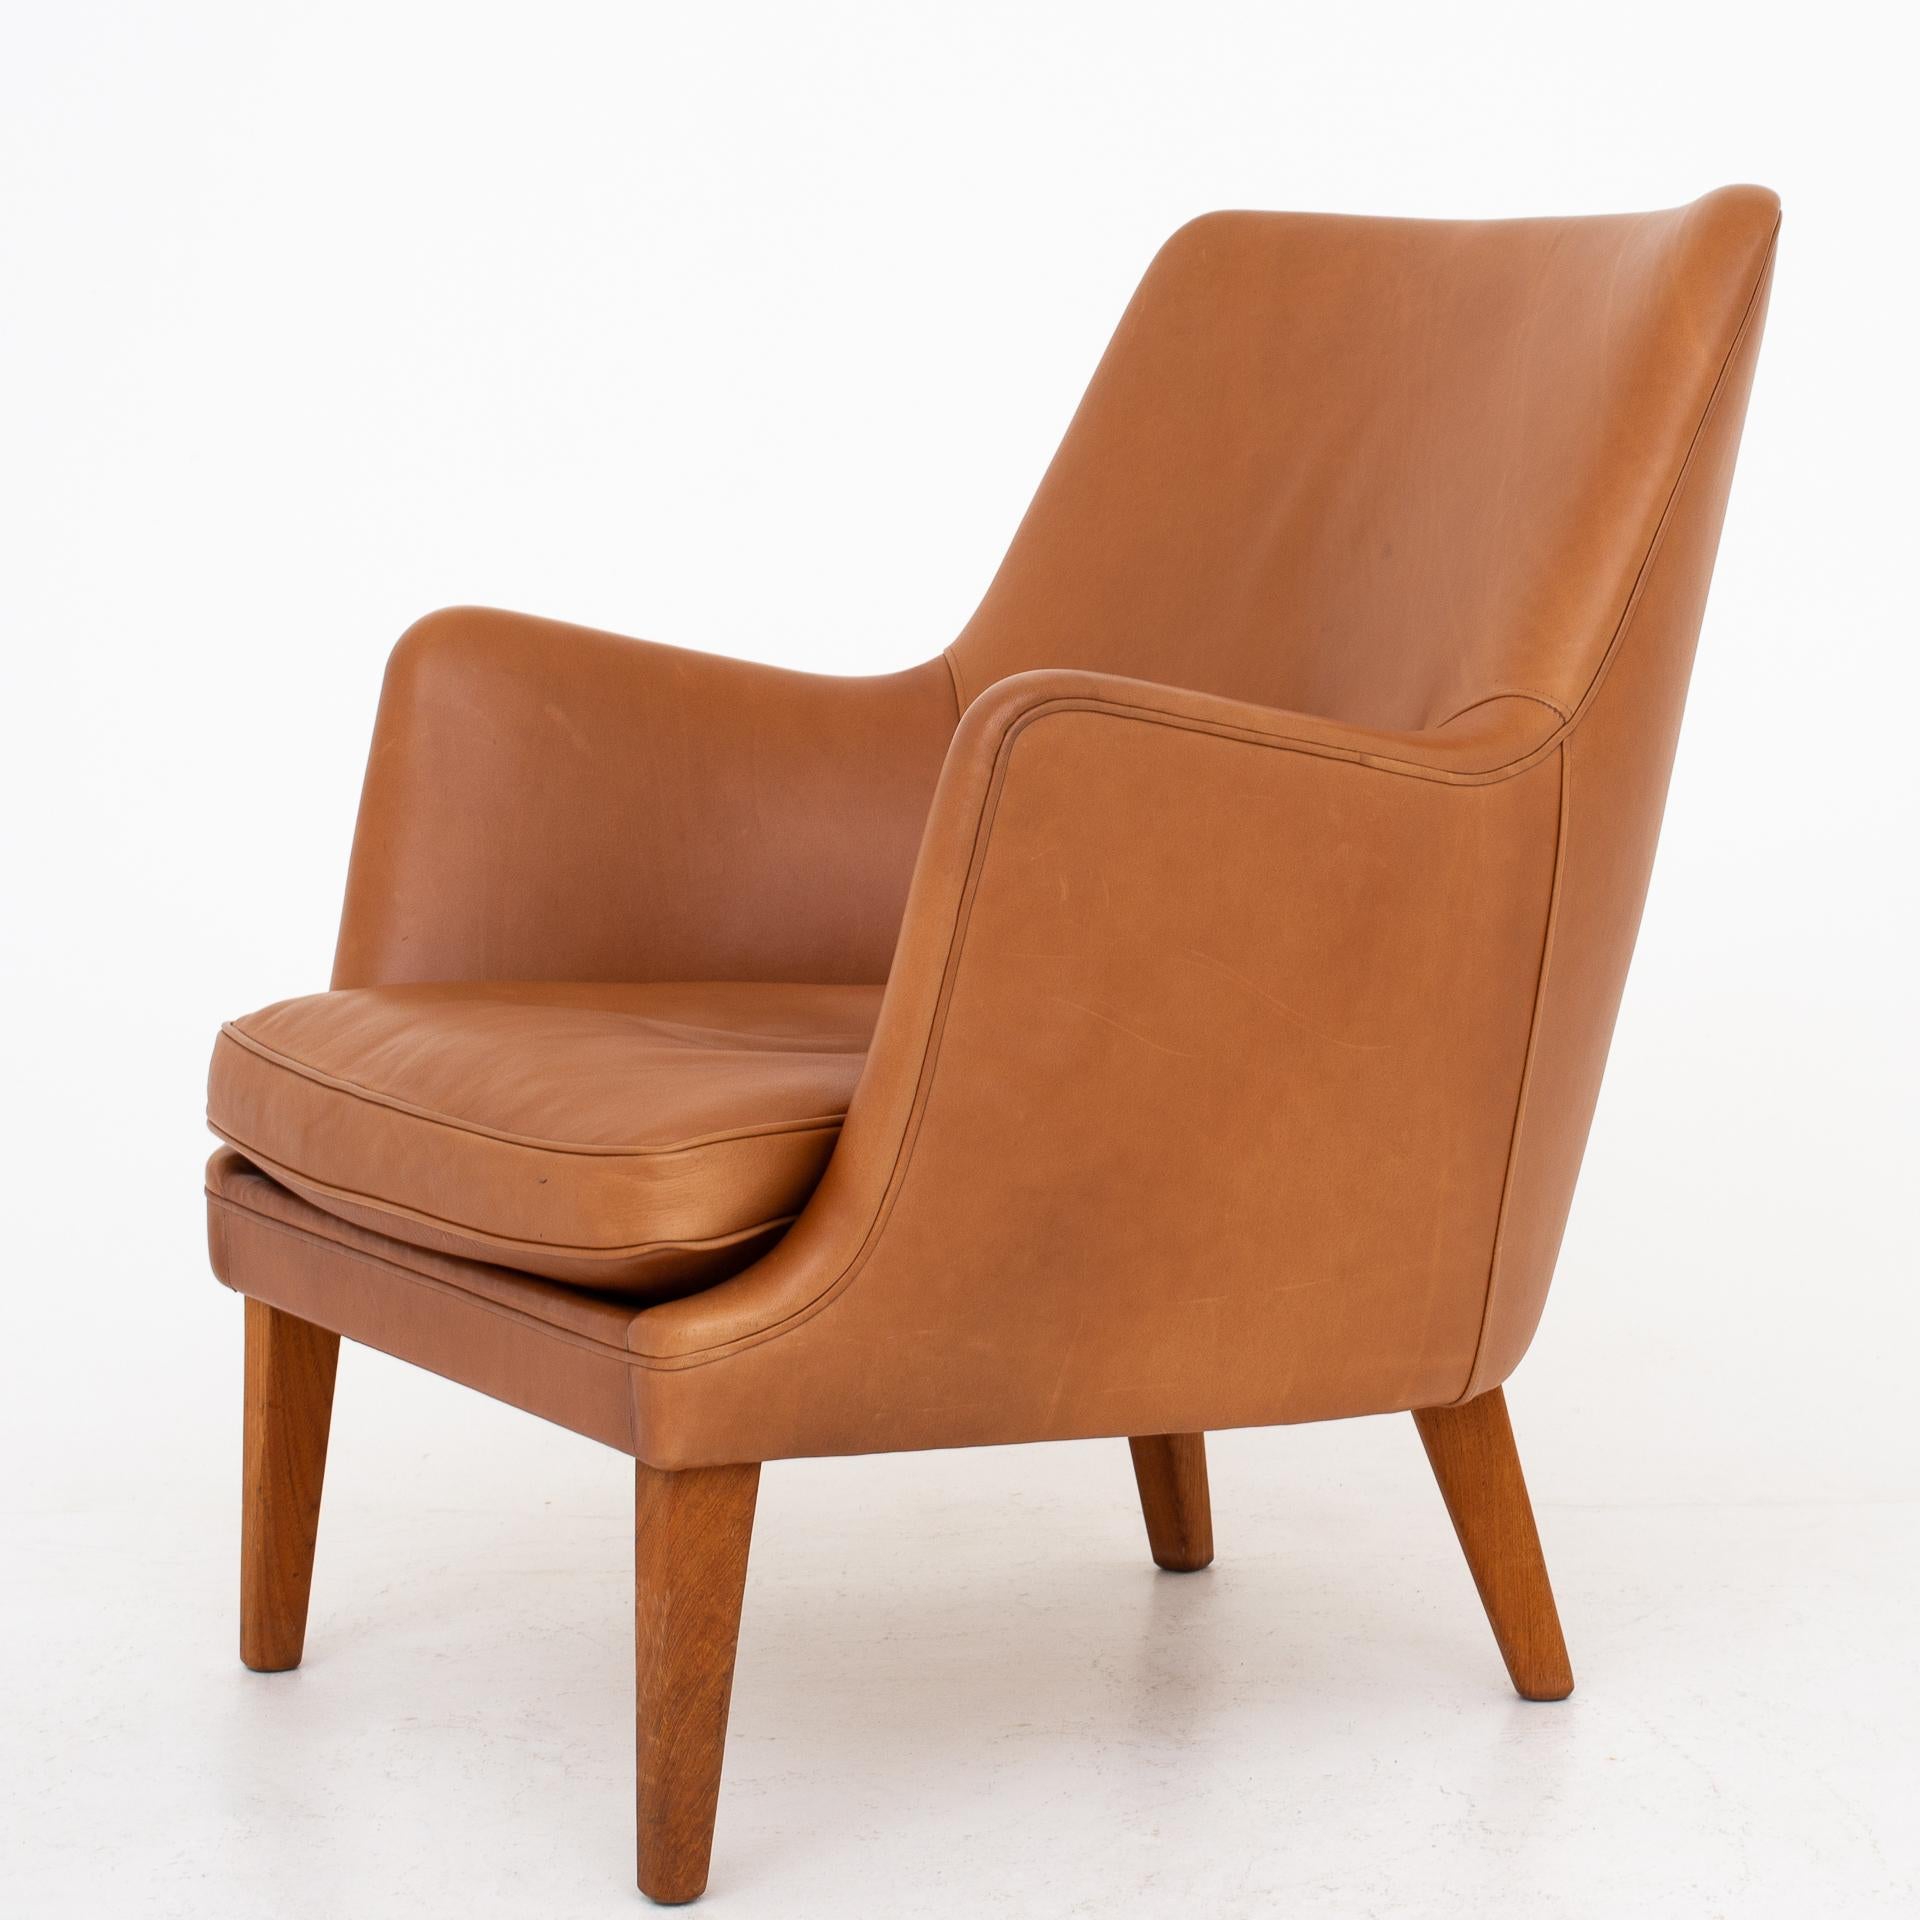 AV 53 set consisting of easy chair and 3-seat sofa. Cognac leather with legs in teak. Maker Ivan Schlechter.